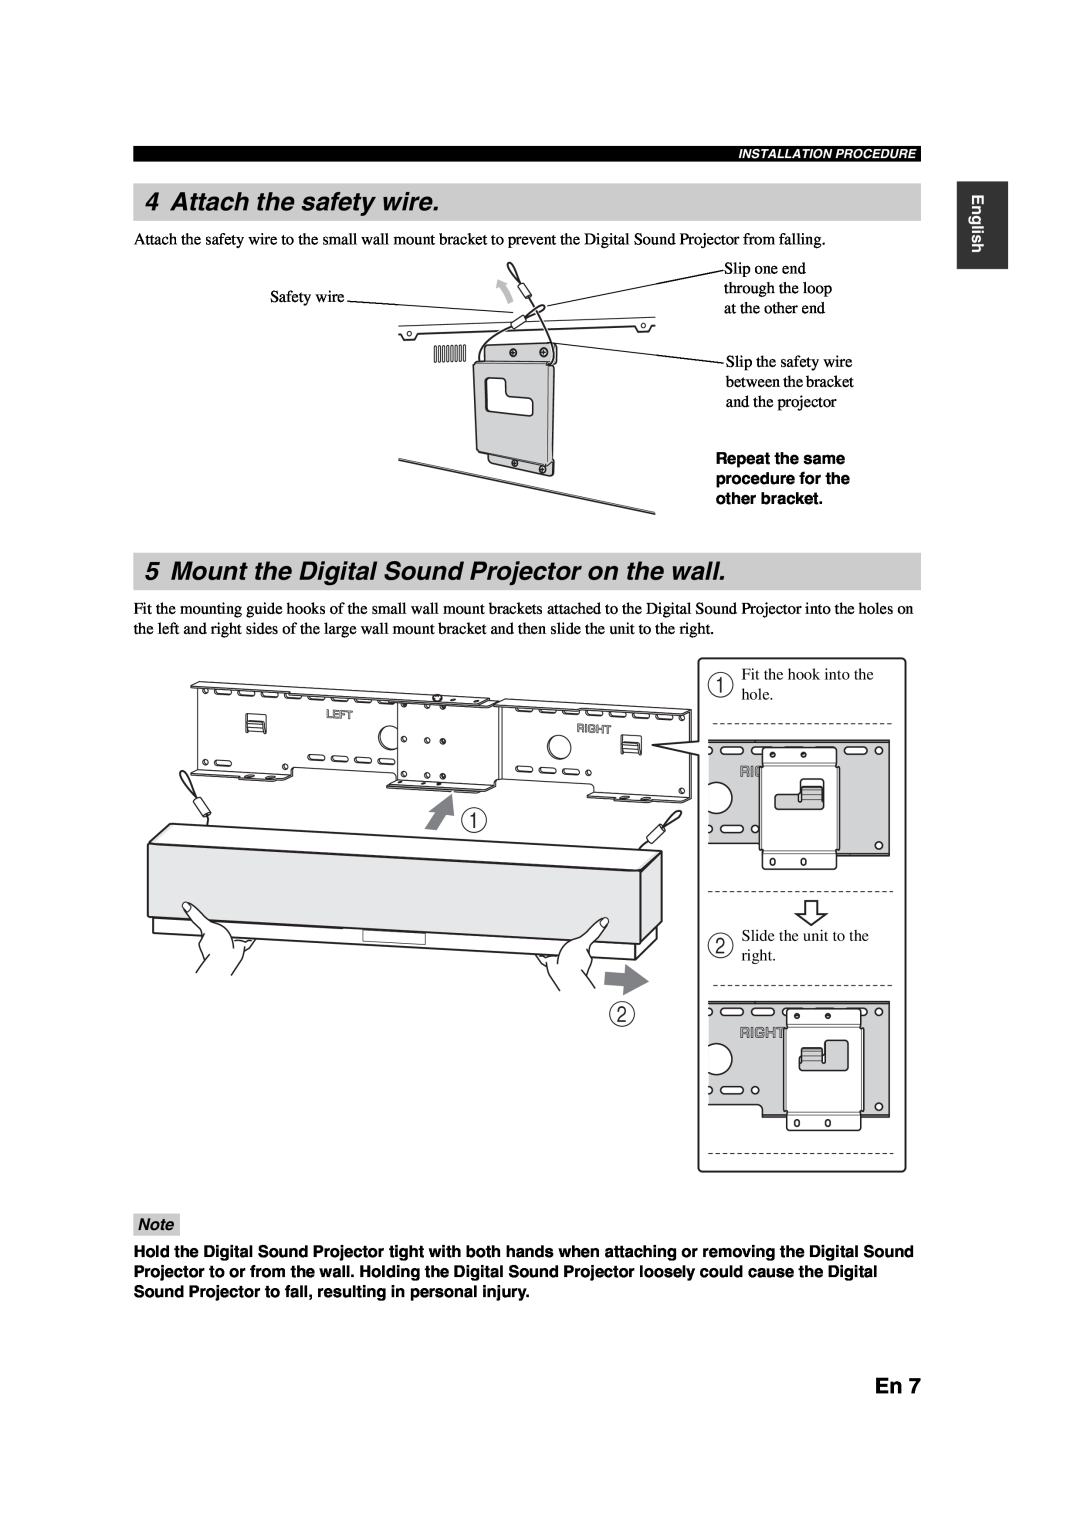 Yamaha SPMK30 installation manual Attach the safety wire, Mount the Digital Sound Projector on the wall, English 